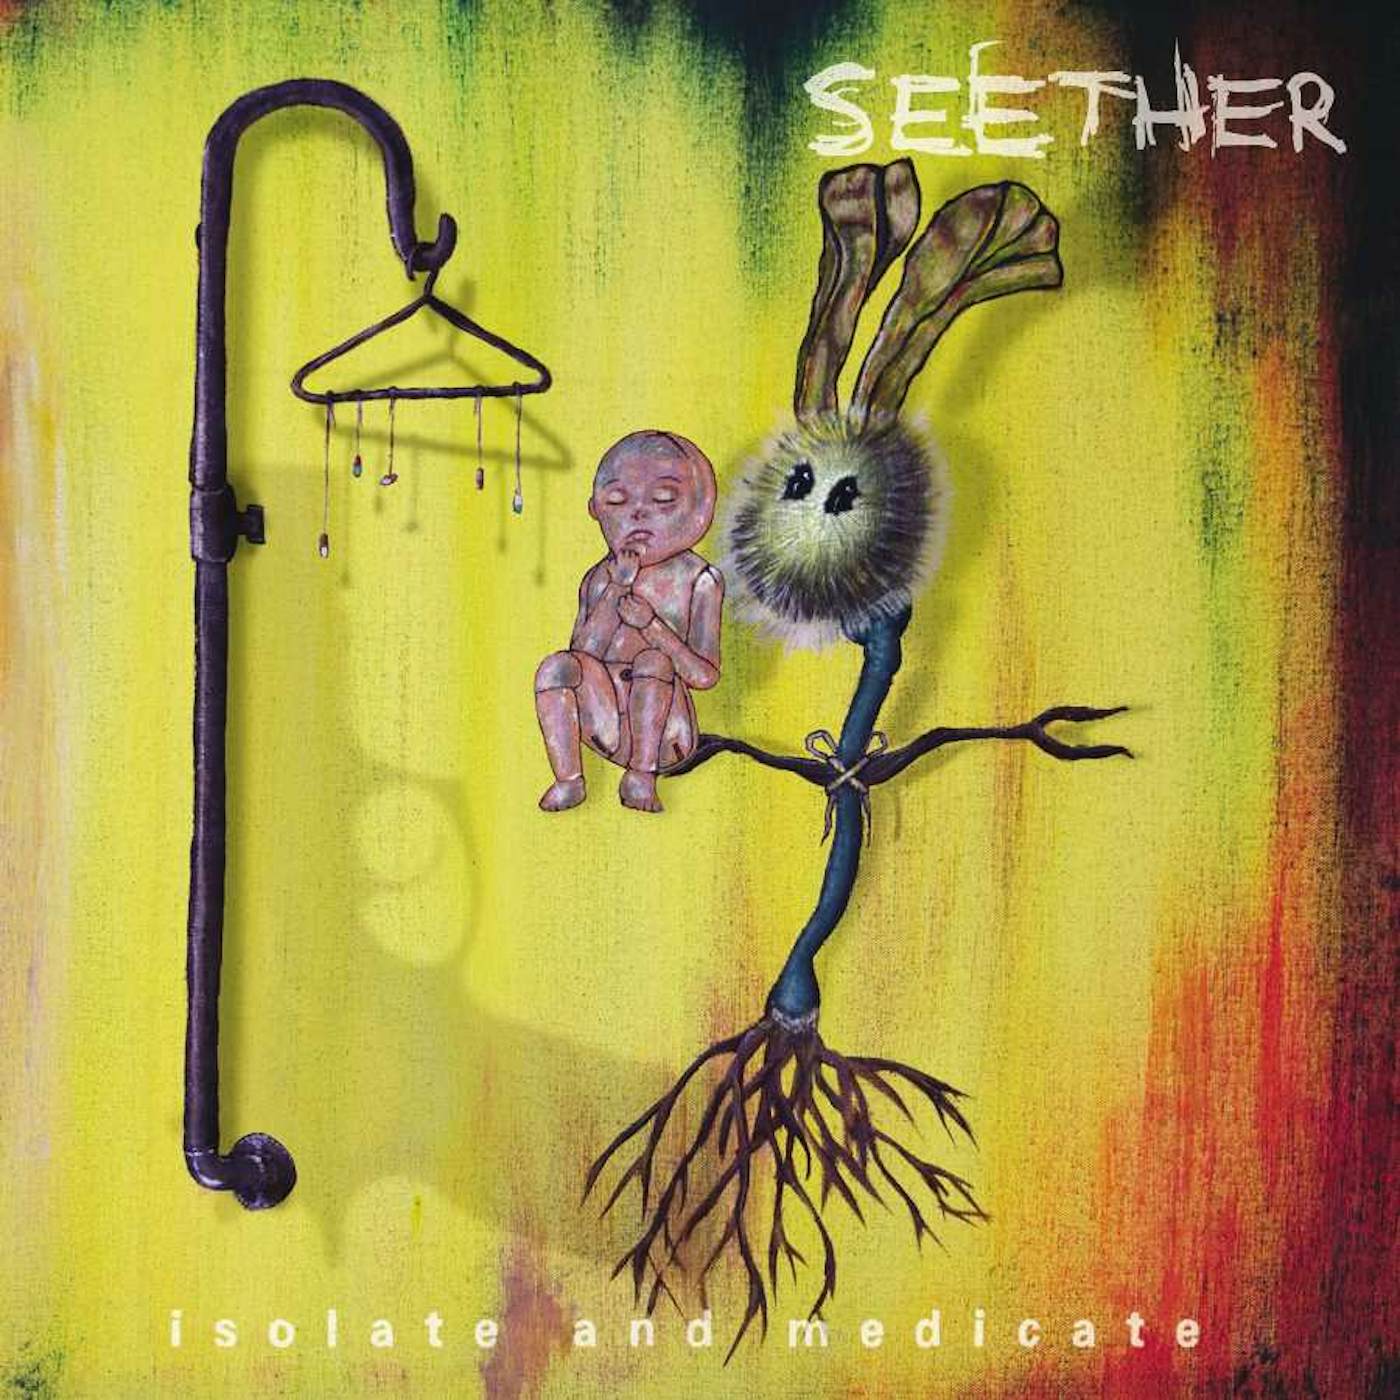 Seether Isolate And Medicate Vinyl Record